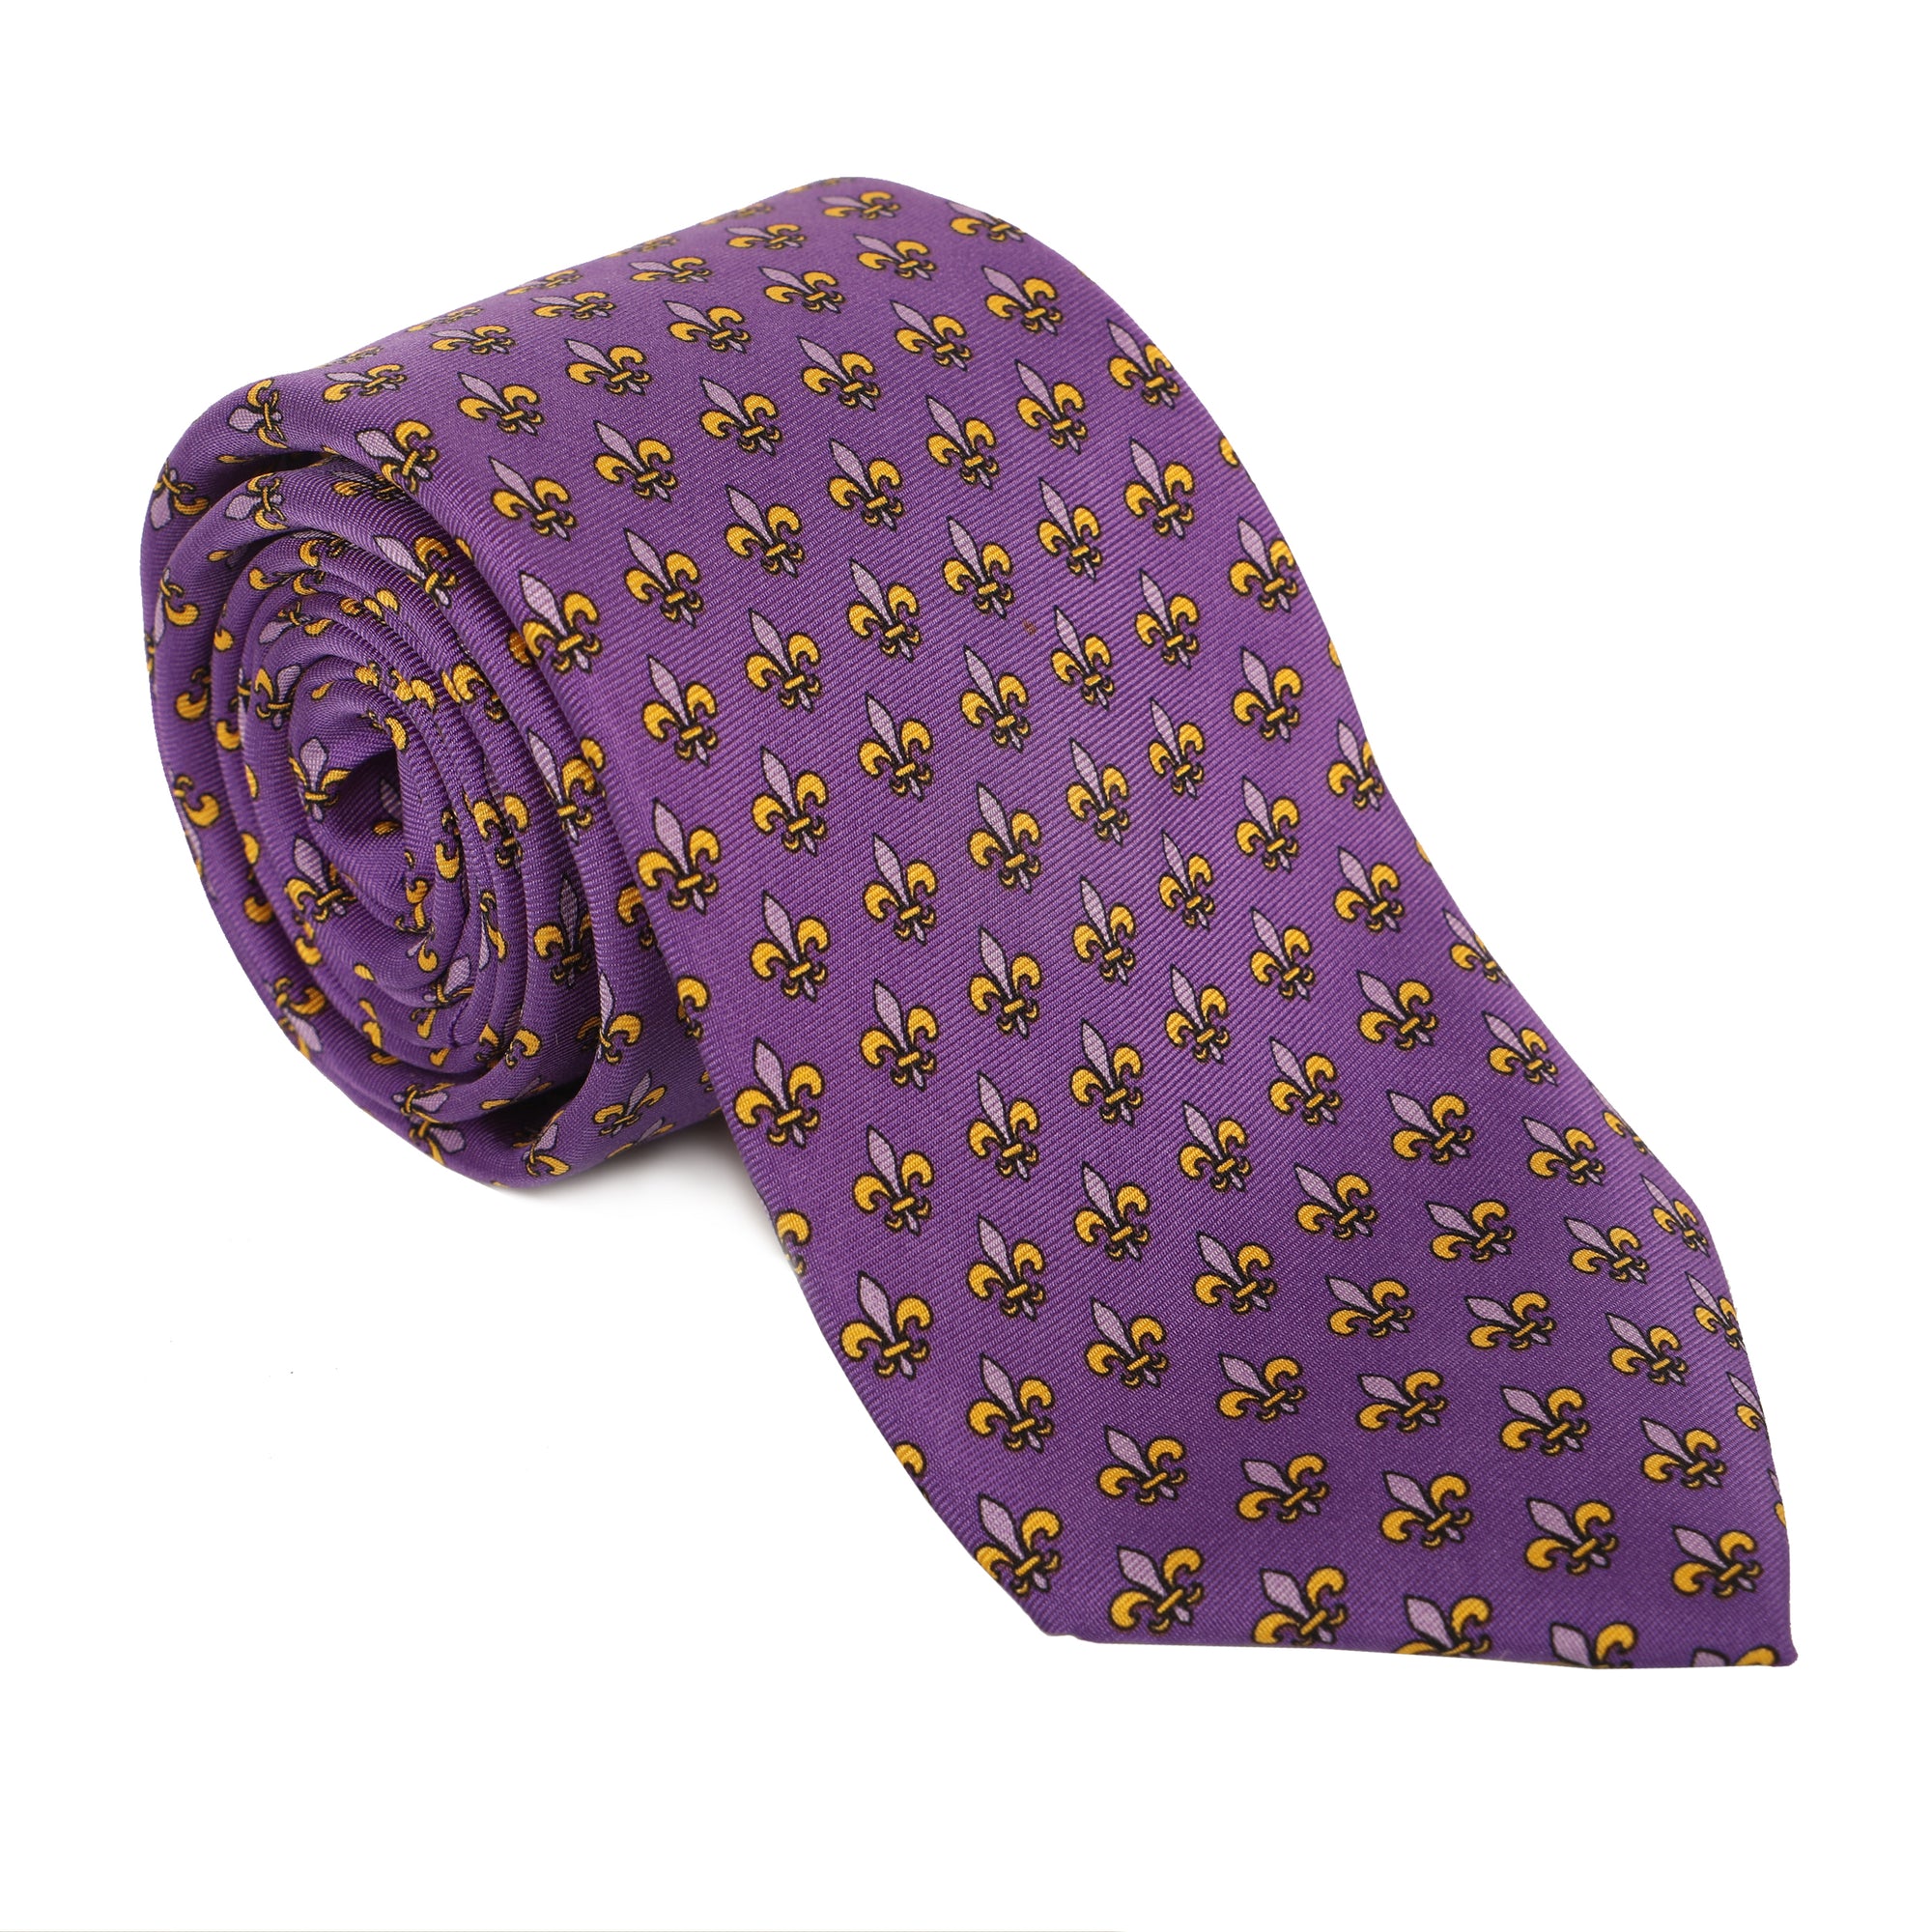 Represent like royalty in our regal 100% silk ties. Purple & gold and good to geaux (go)! Tie one on so you can tie one on!  Limited Edition Haspel x NOLA Couture Exclusive Collaboration  •  100% Silk  •  3" Wide  •  Seersucker Tipped and Seersucker Keeper  •  Made in USA